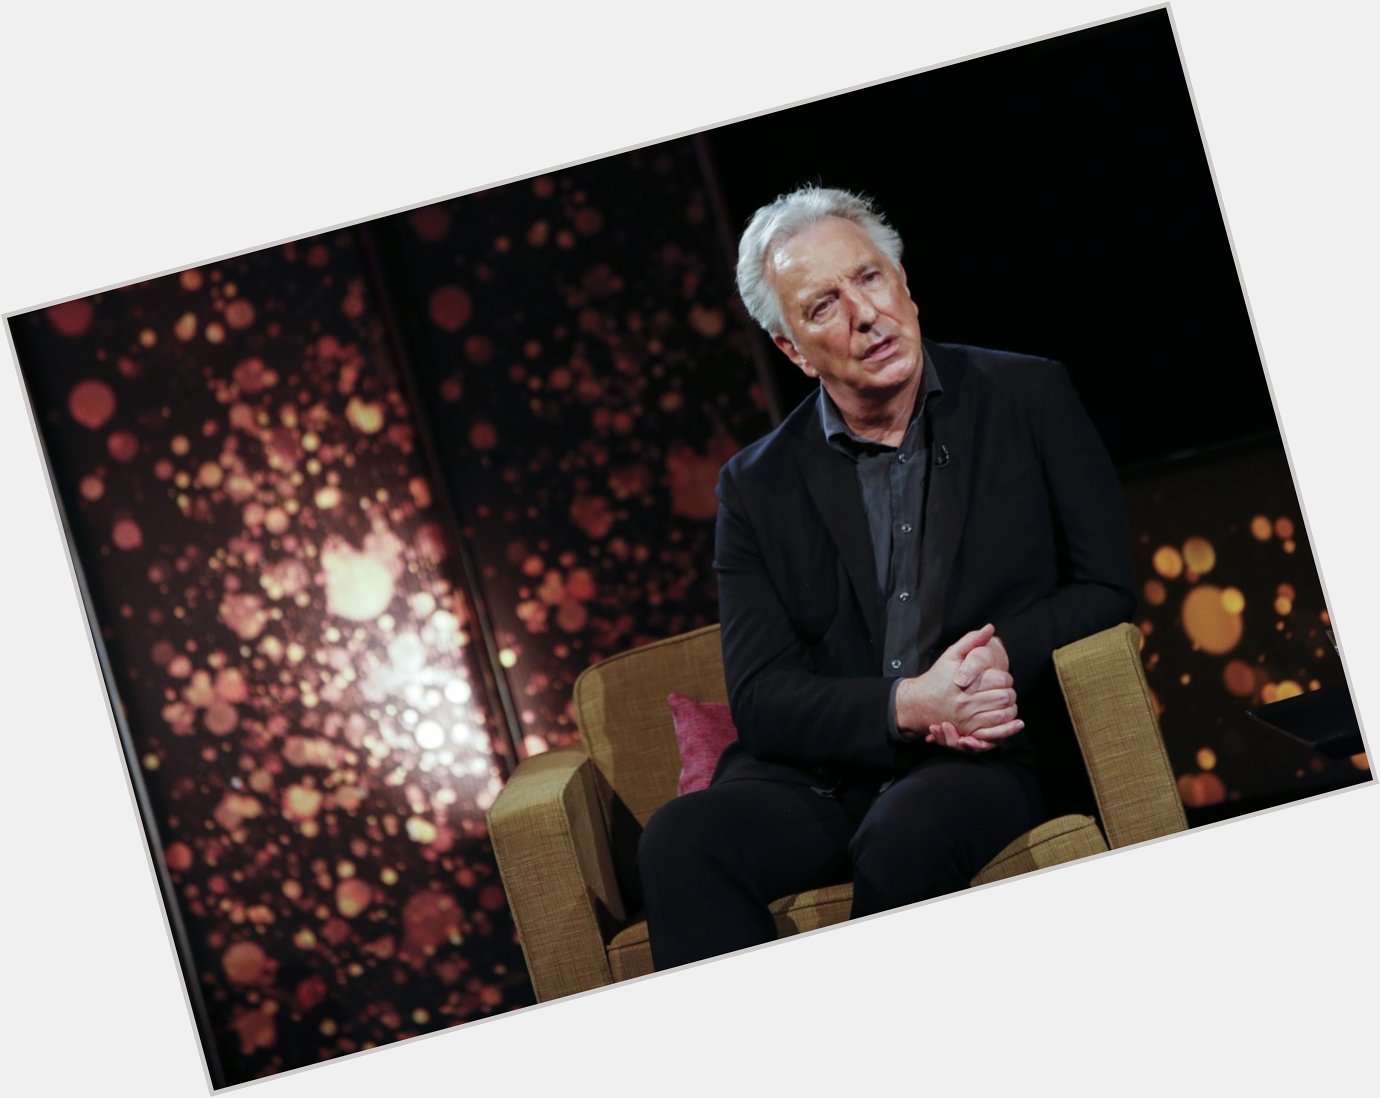 Alan Rickman? Always.

Happy Birthday to the BAFTA-winning Alan Rickman, what role do you remember him for most? 